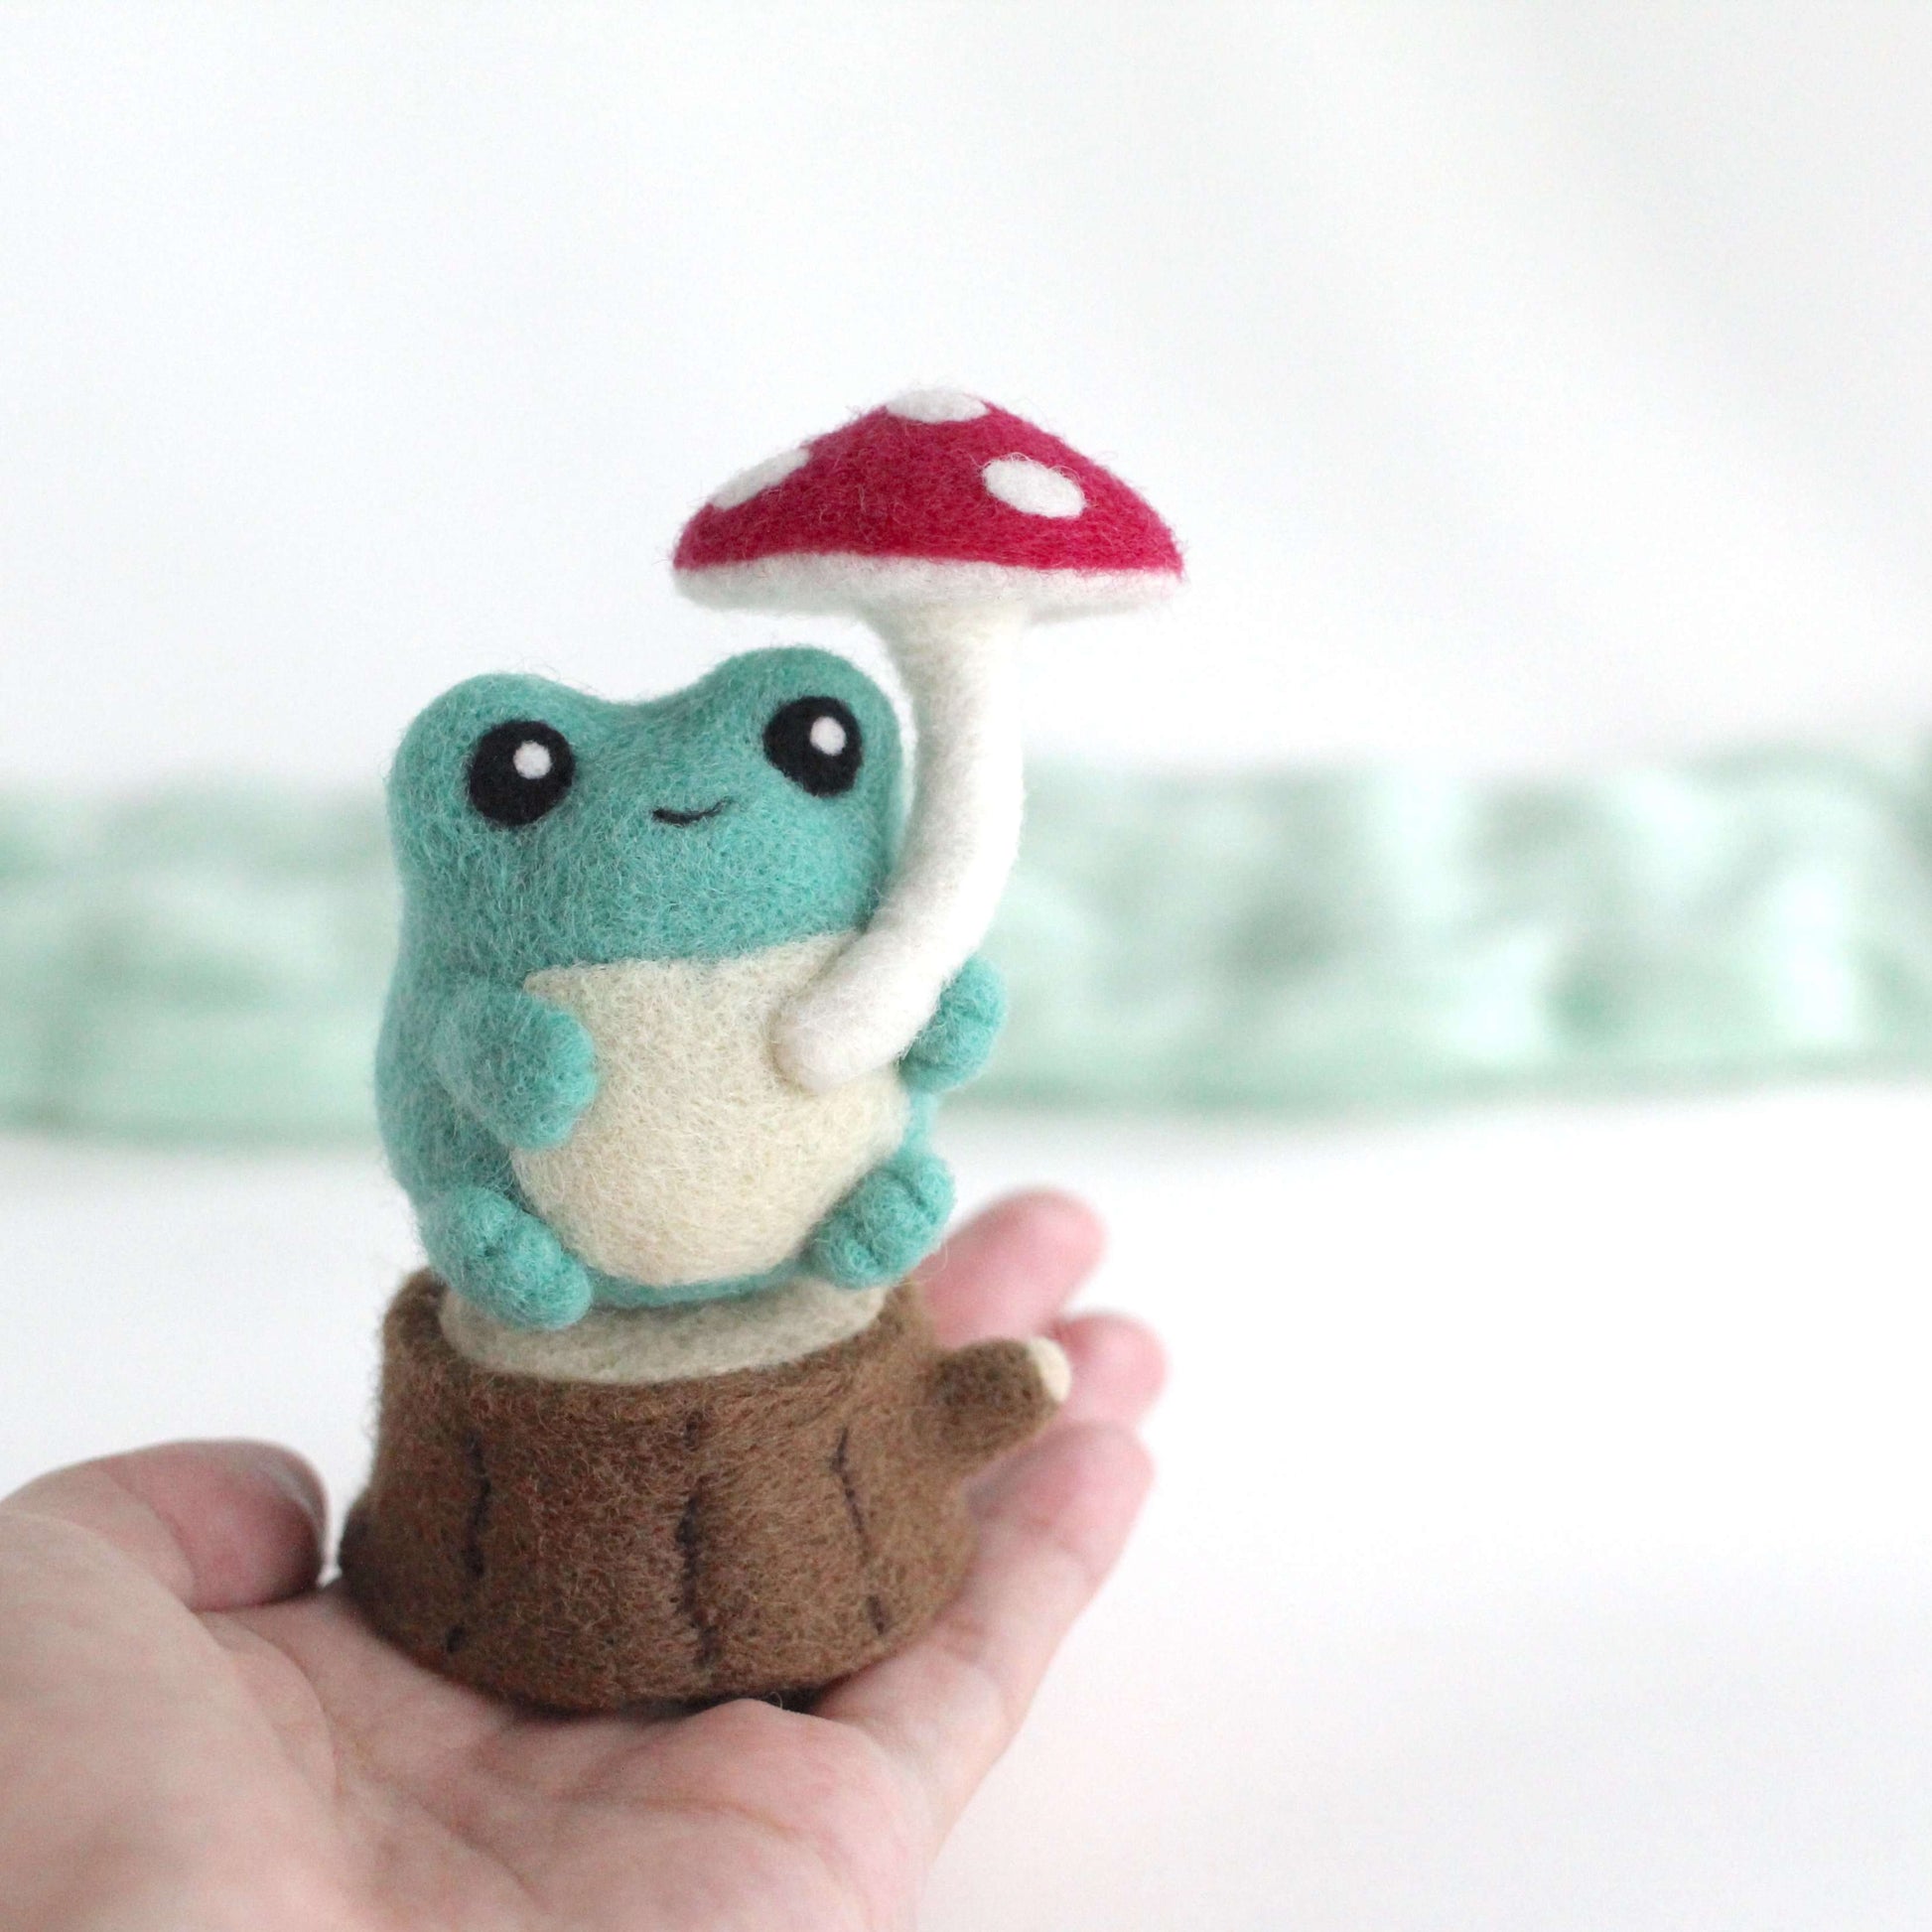 Needle Felted Frog Holding Mushroom Umbrella by Wild Whimsy Woolies